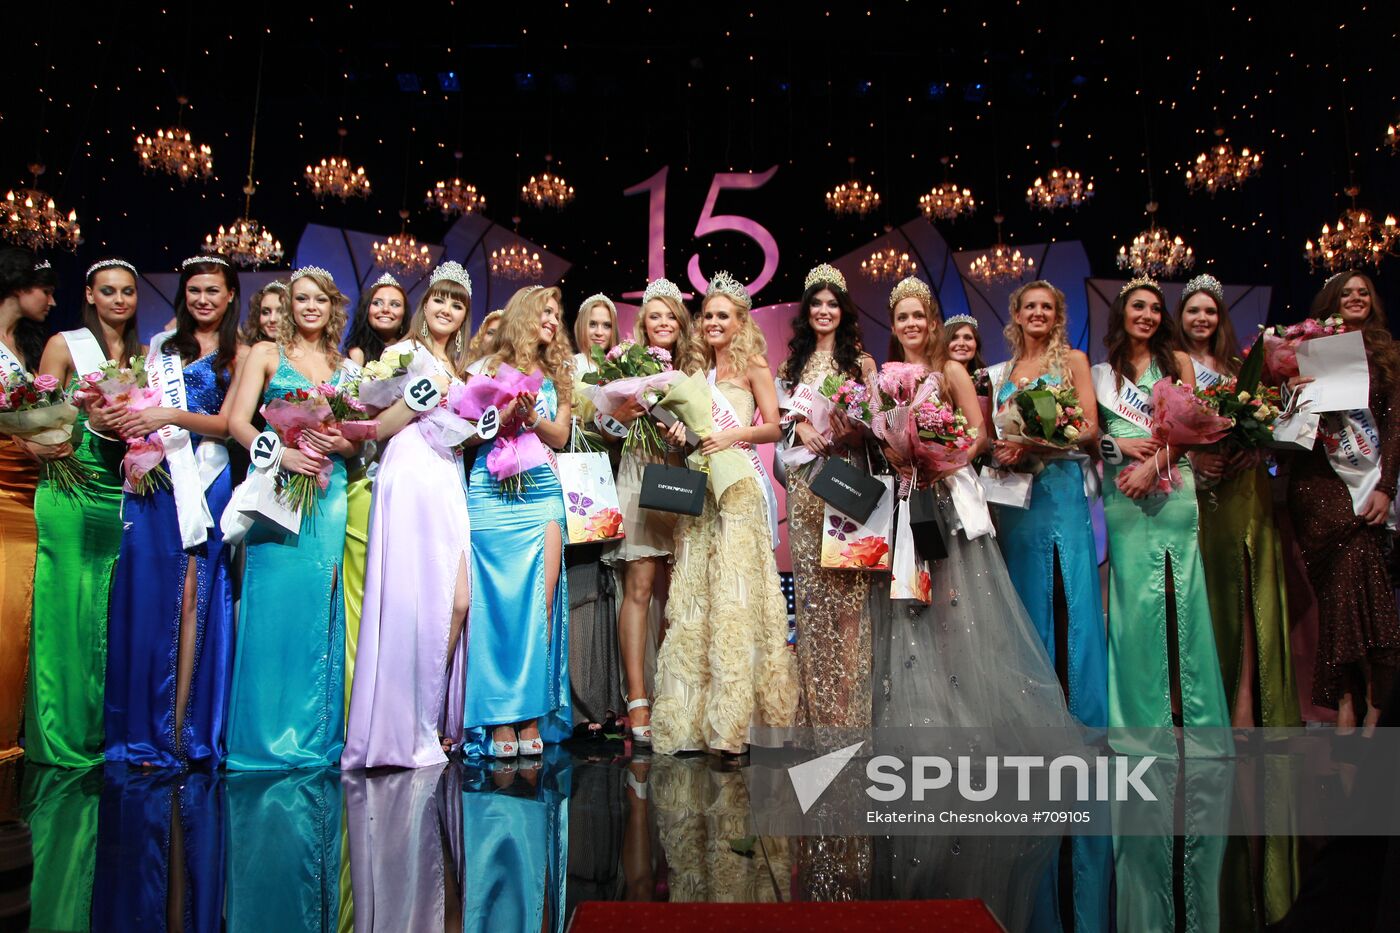 2010 Miss Moscow beauty contest finalists